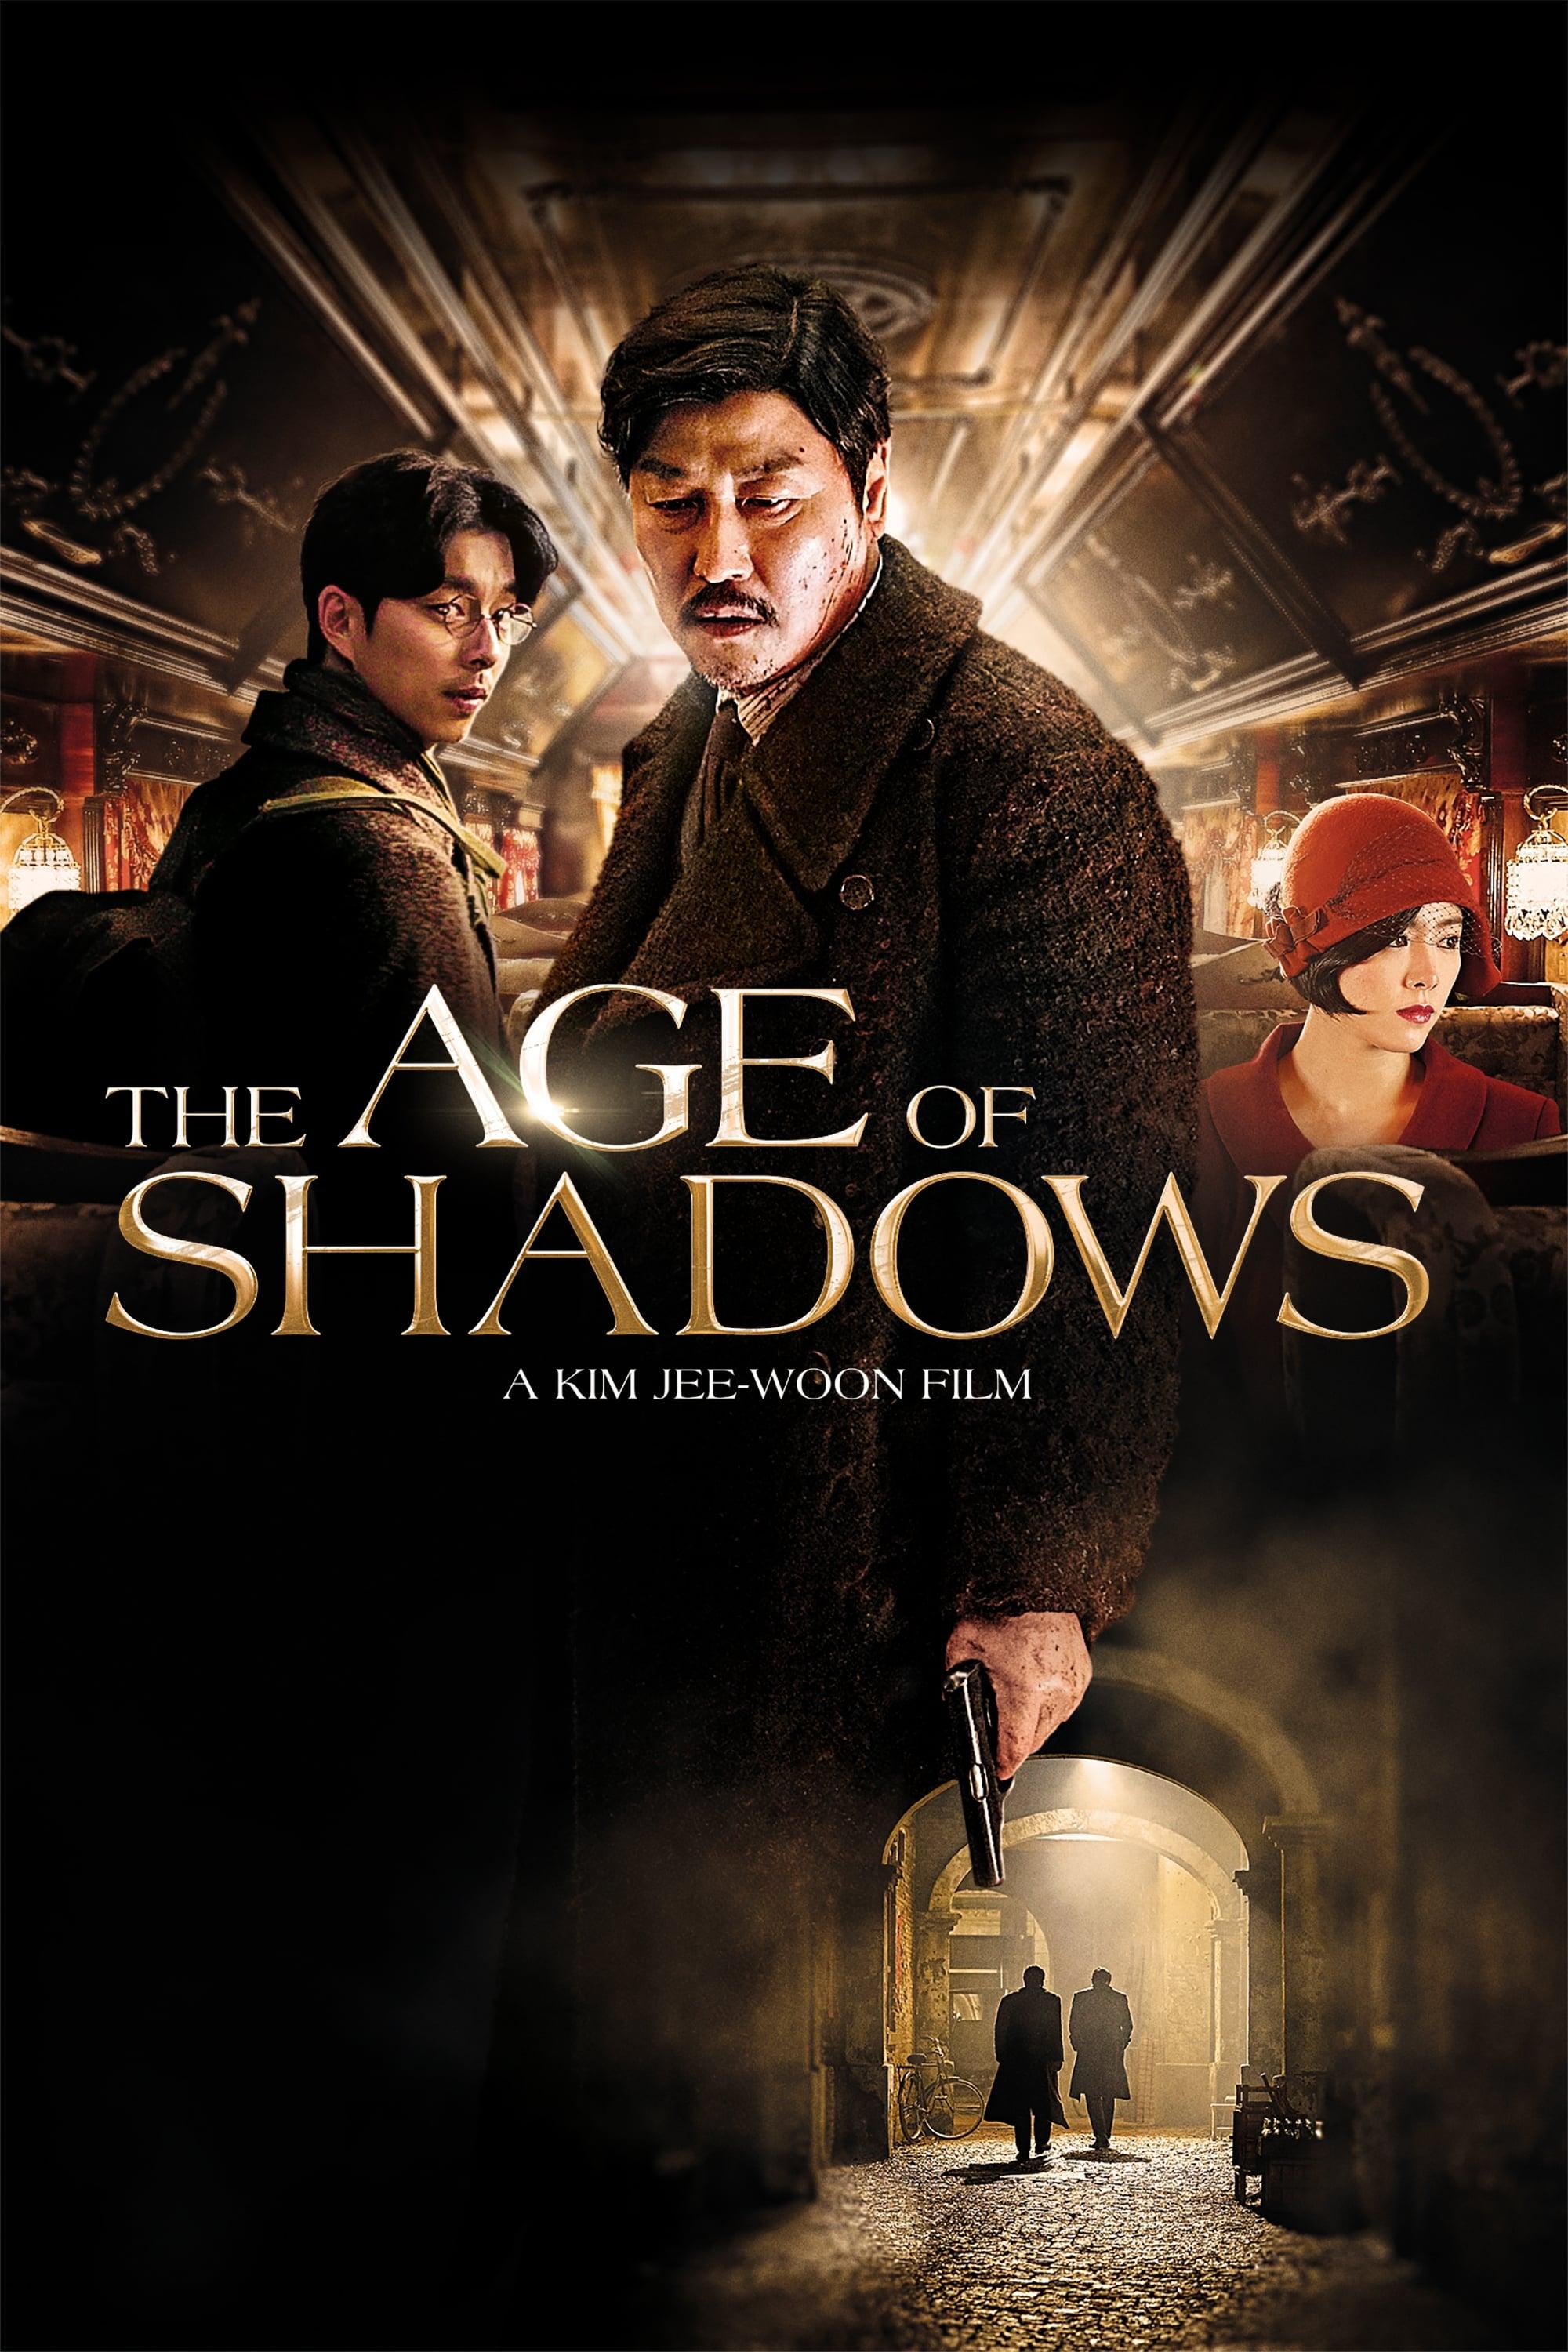 The Age of Shadows poster